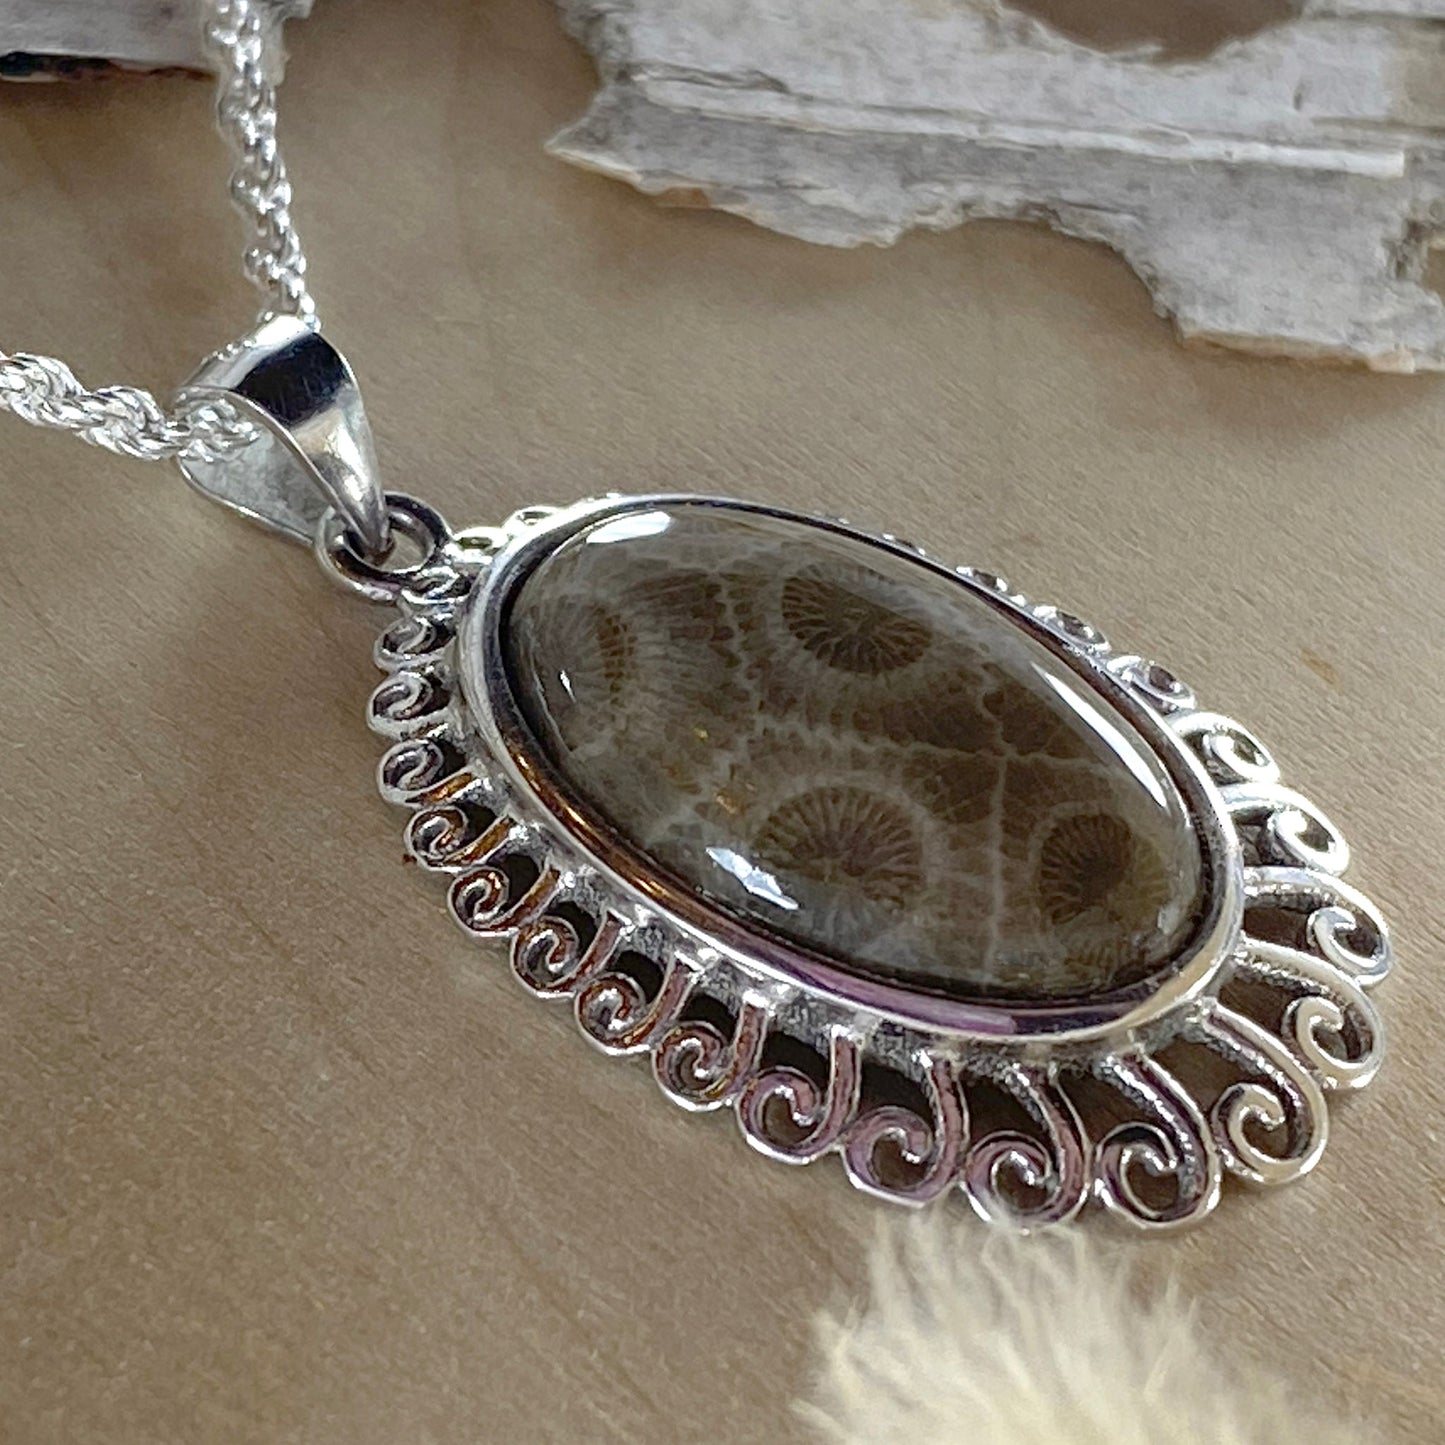 Petoskey Stone Pendant Necklace Front Viaew - Stone Treasures by the Lake